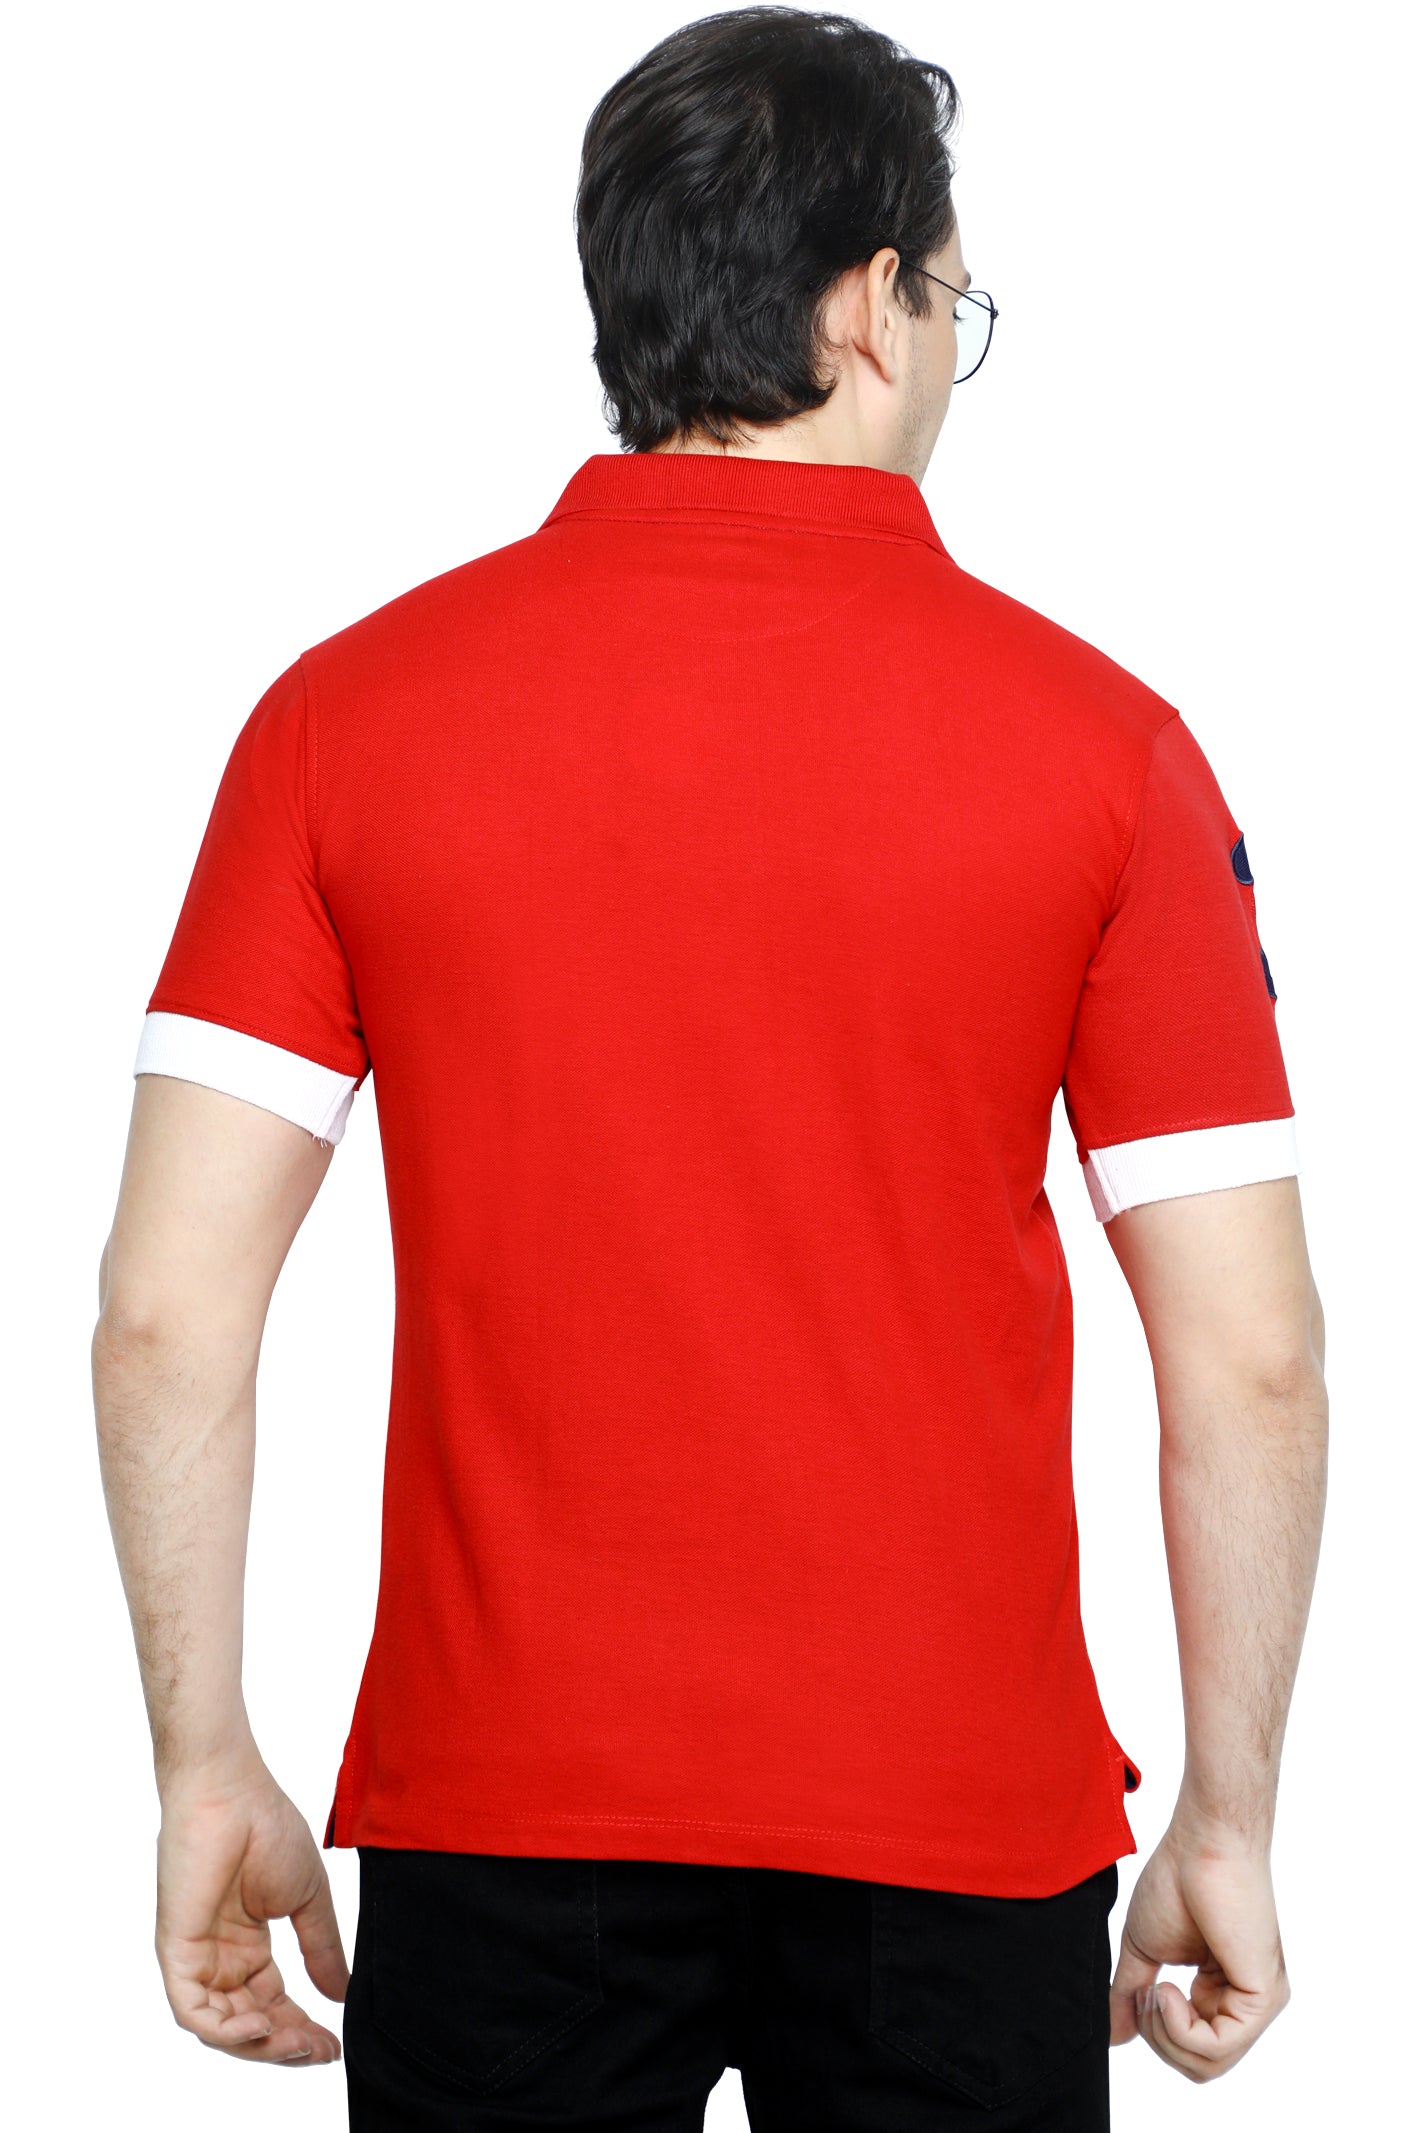 Diners Mens Polo T-Shirt SKU: NA715-RED - Diners